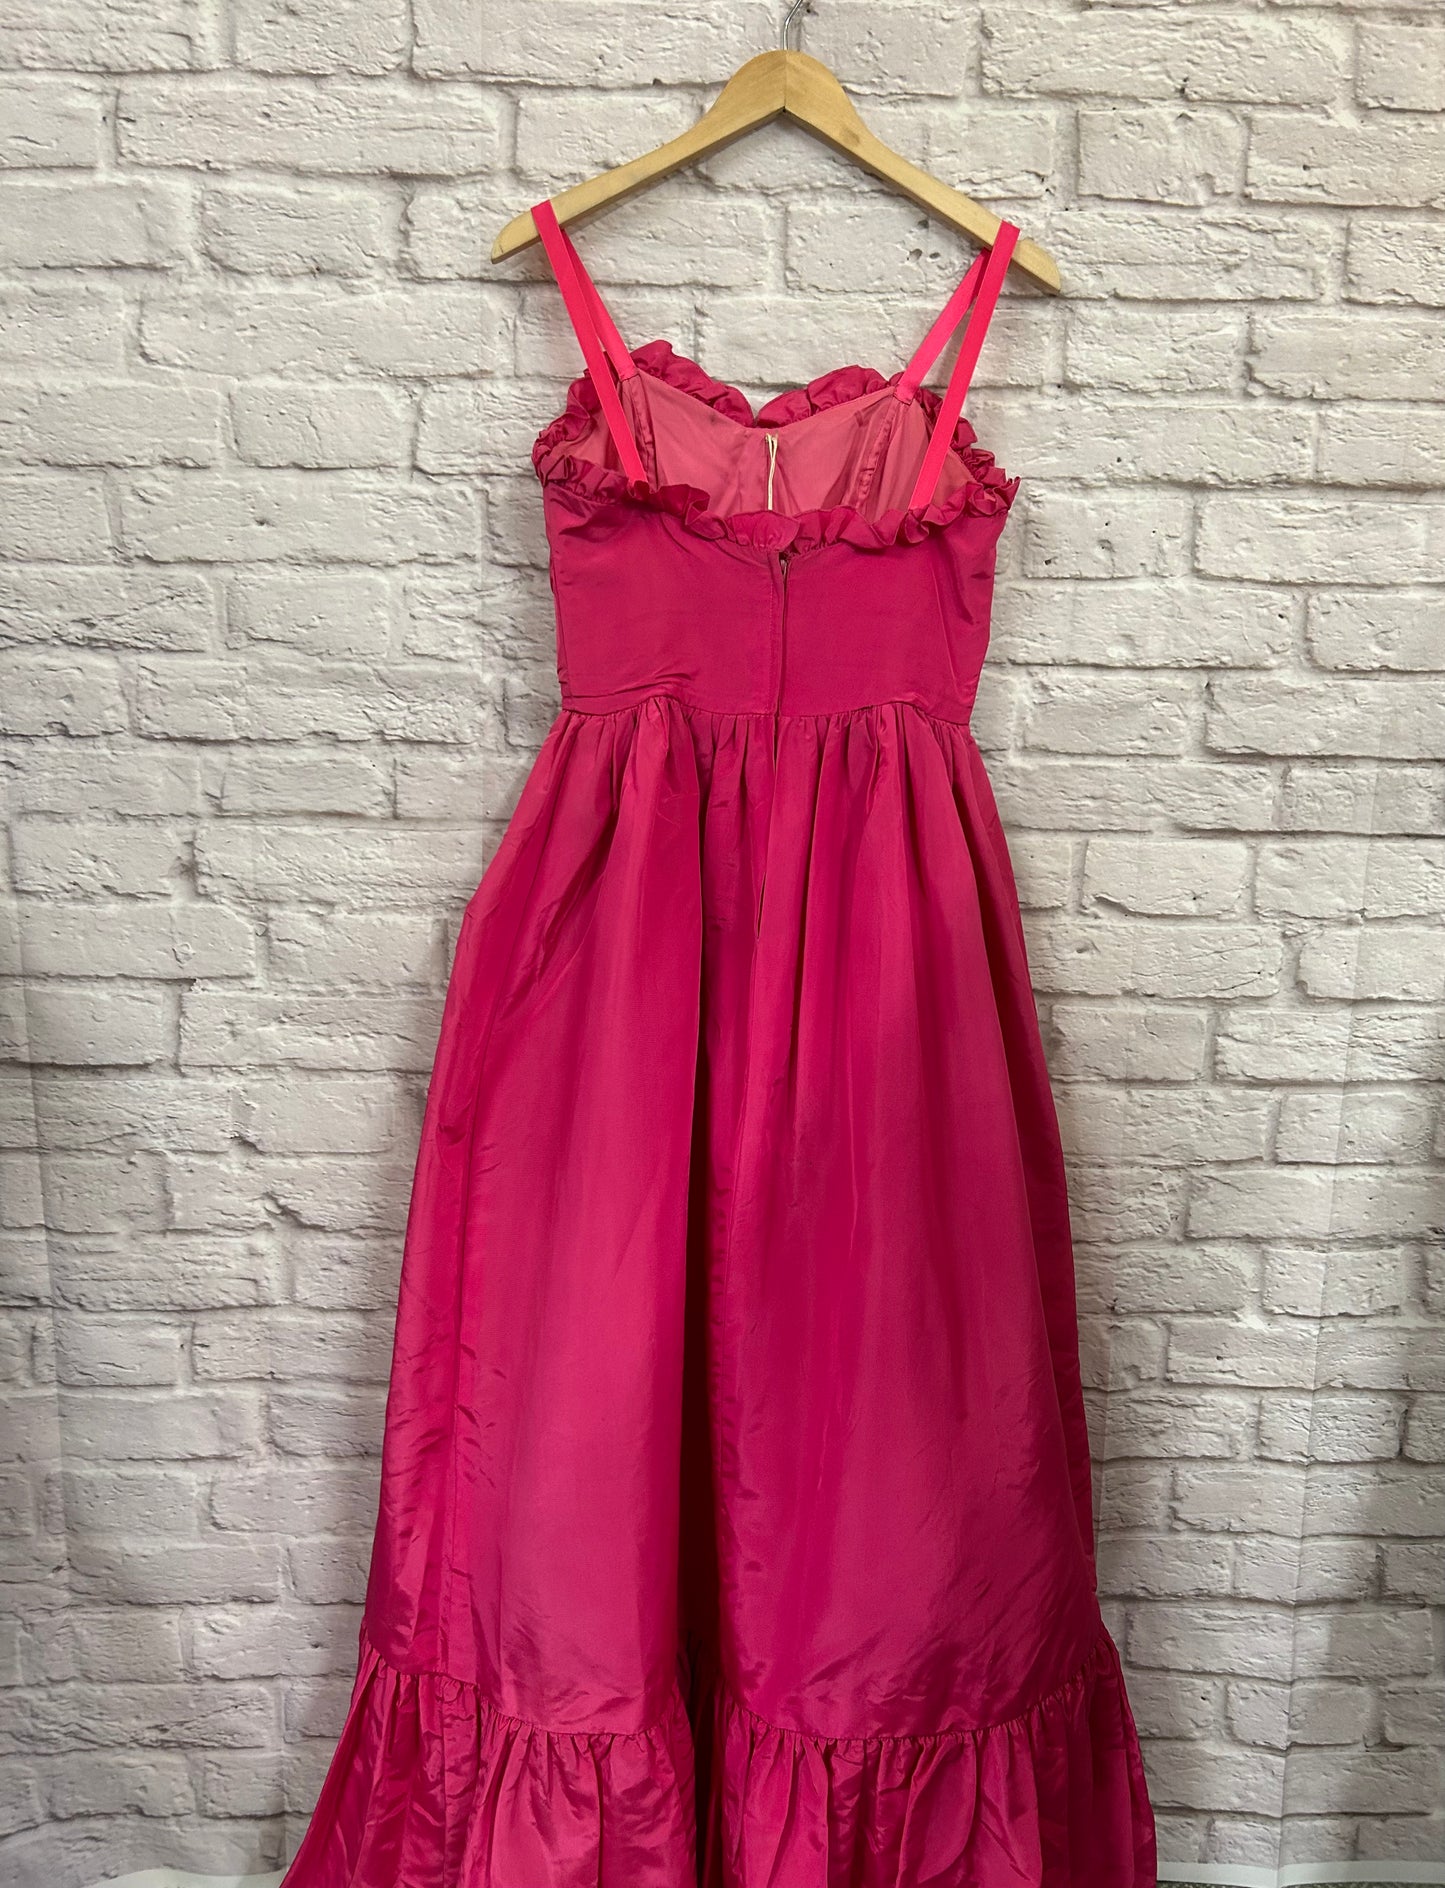 1980s Fuscia Pink Netted Party Dress Size 8-10